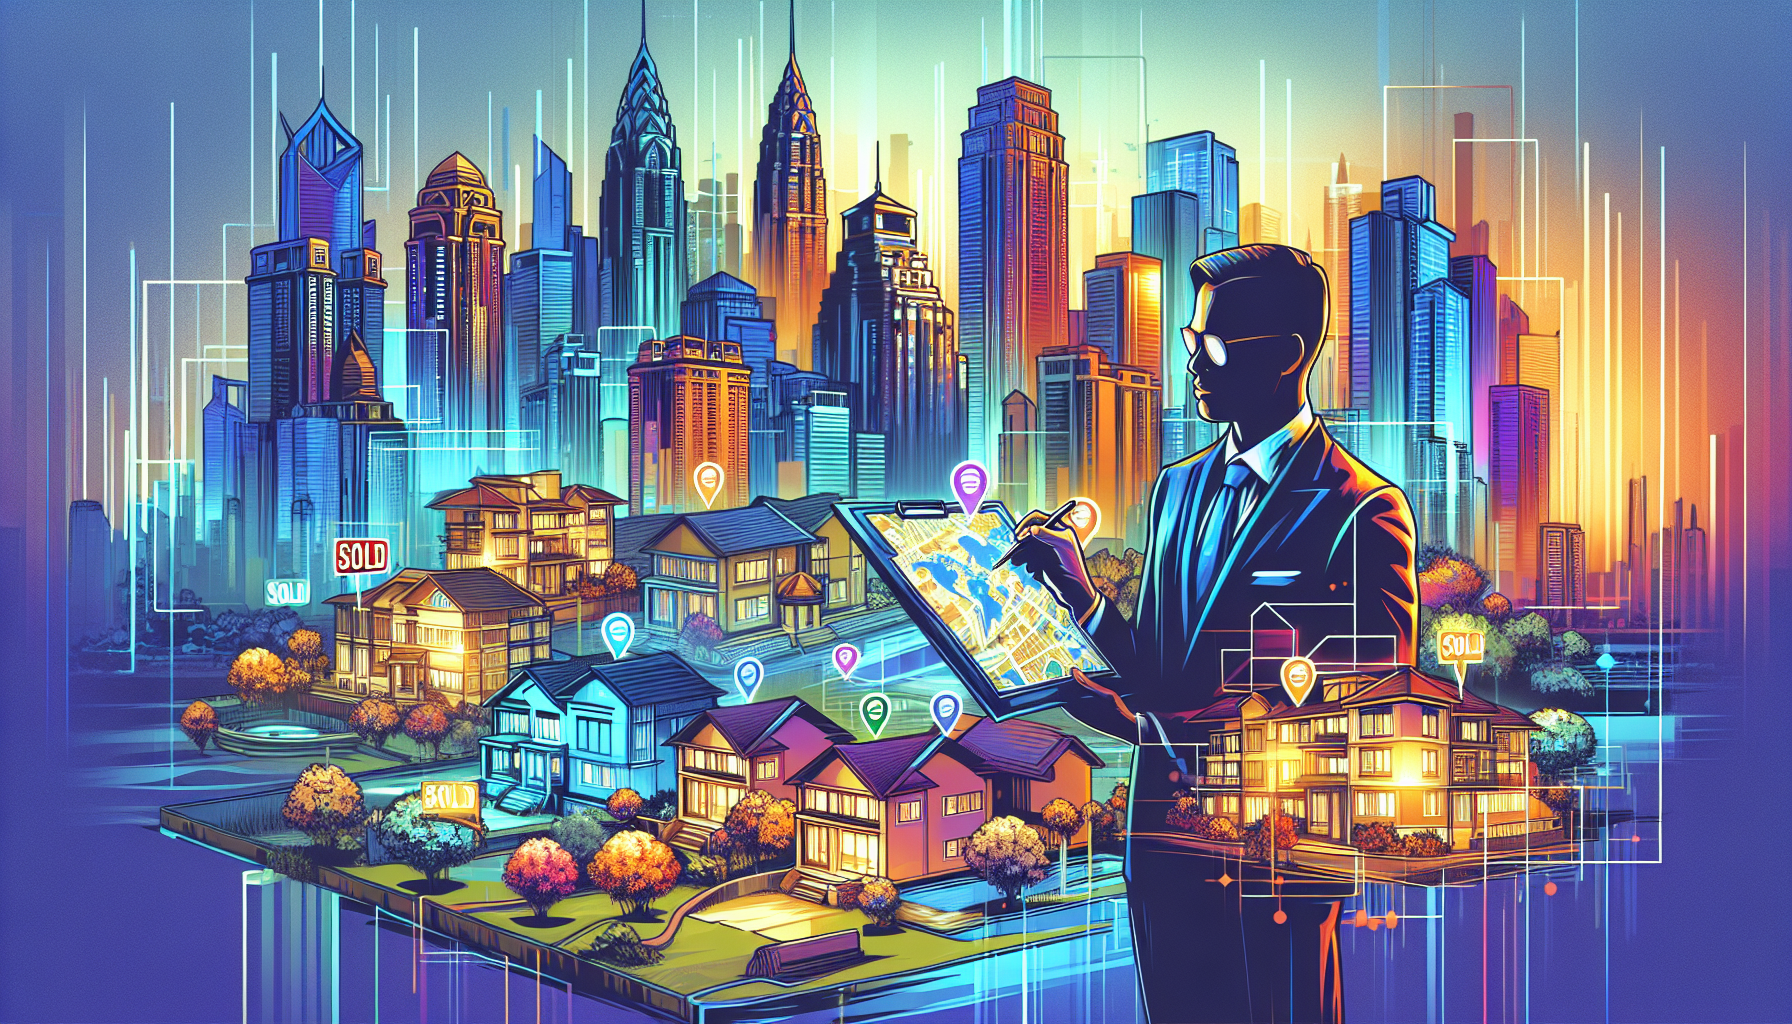 A visually captivating image of a bustling Birmingham cityscape with diverse architectural styles, highlighting a modern investor holding a map marked with various off-market property locations. In th